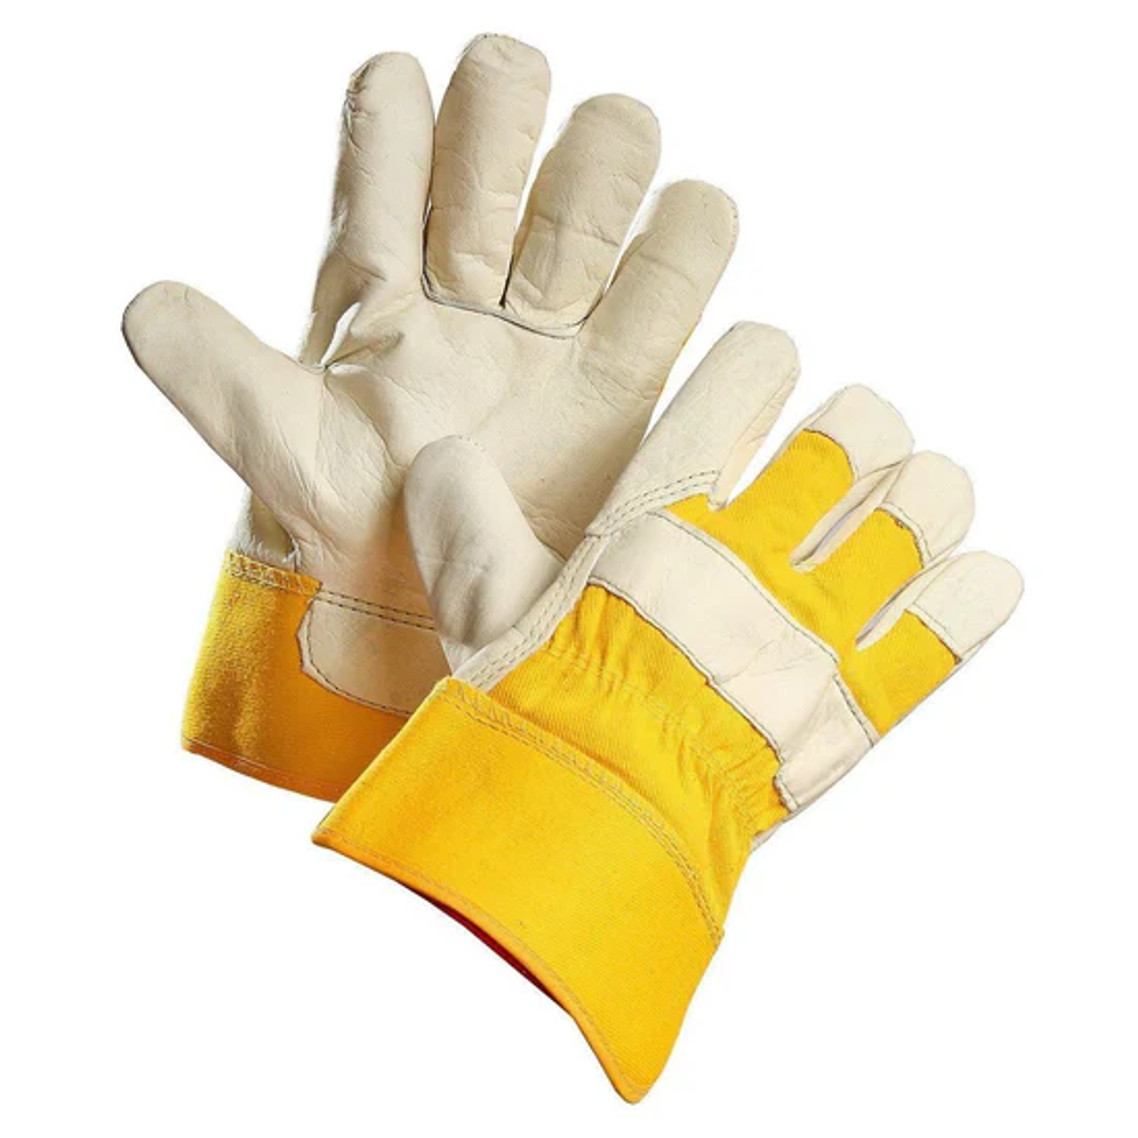 ForceField “Dyna-Glove” Grain Leather Work Glove with Fleece Liner (12 Pairs/Box) | SafetyApparel.ca